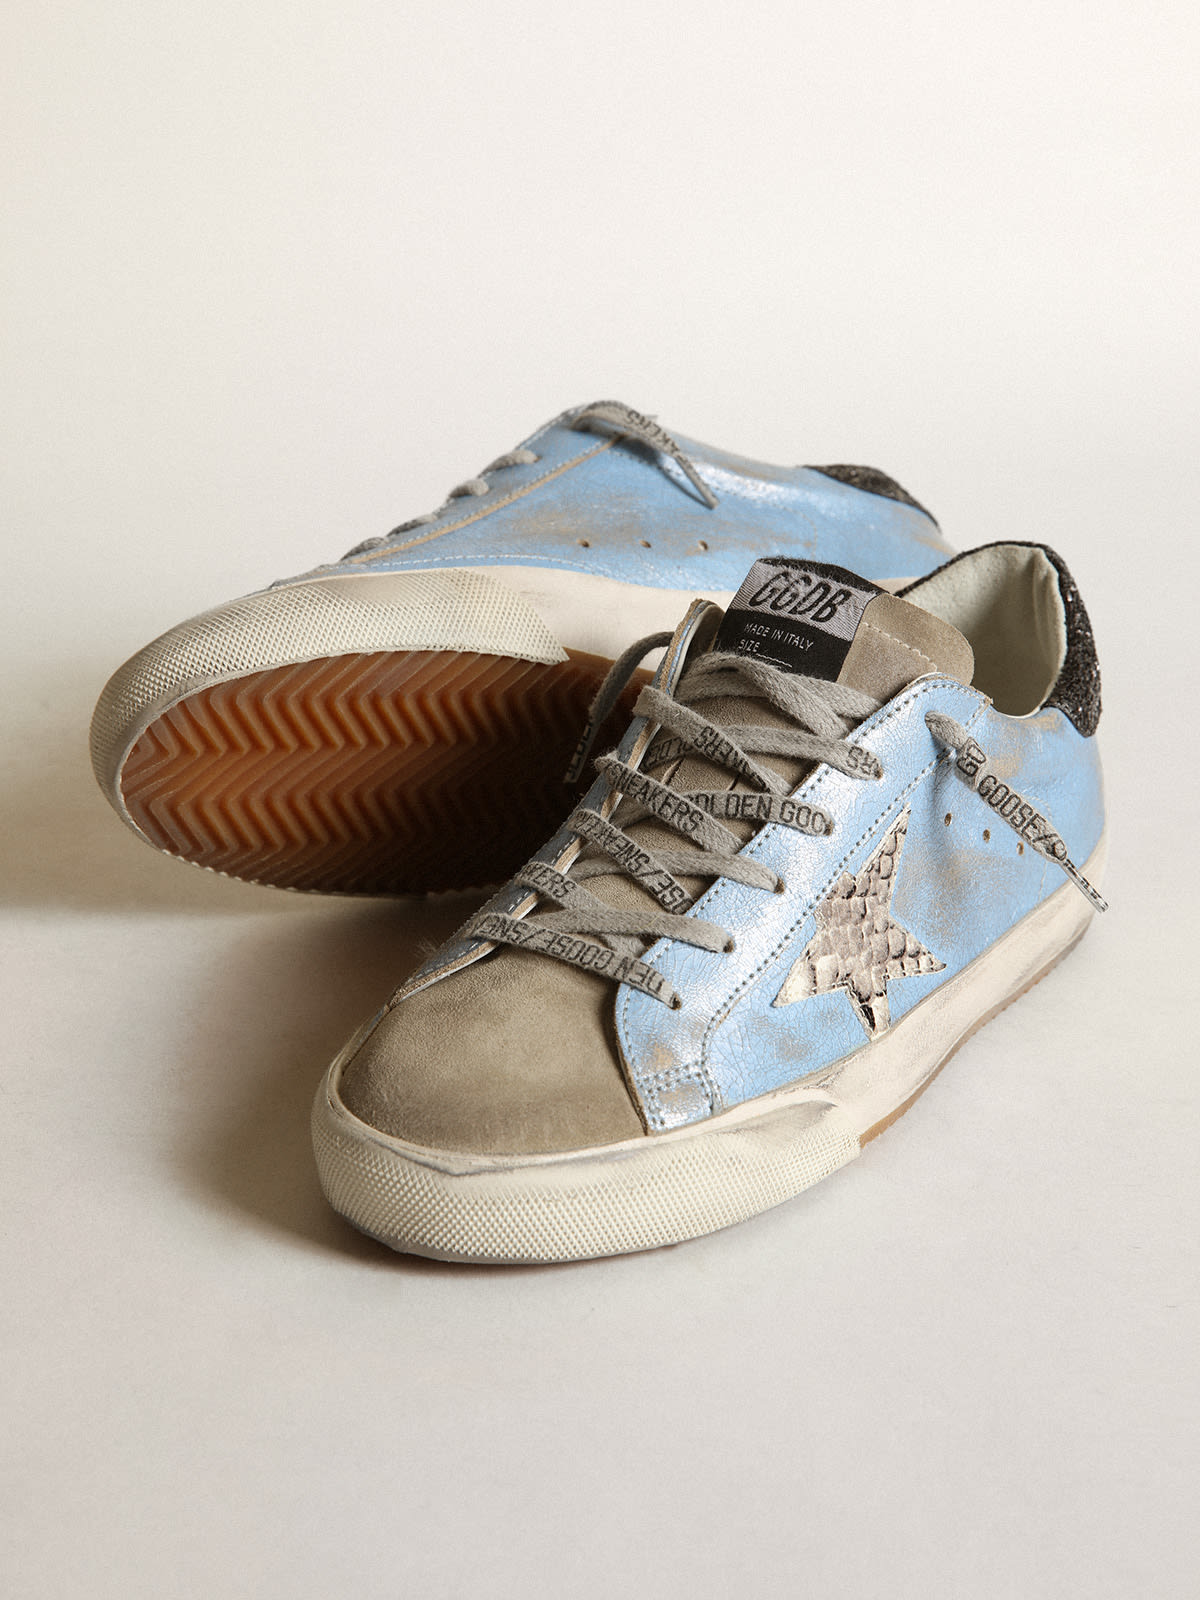 Golden Goose - Light blue Super-Star LTD with a gray star and glitter heel tab in 